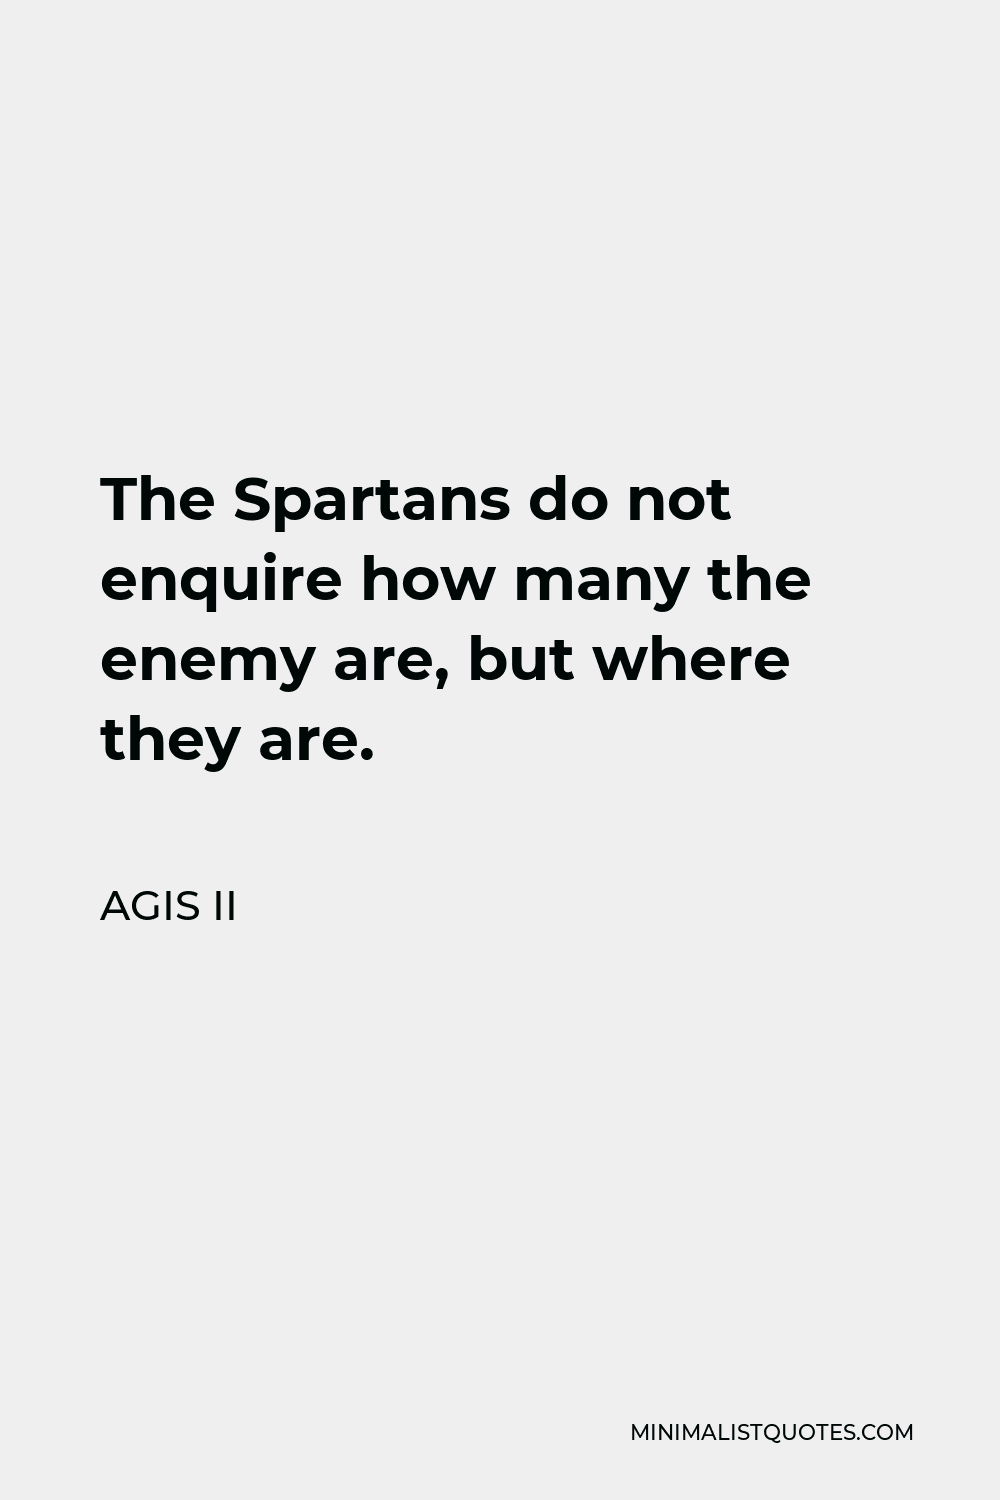 Agis II Quote - The Spartans do not enquire how many the enemy are, but where they are.